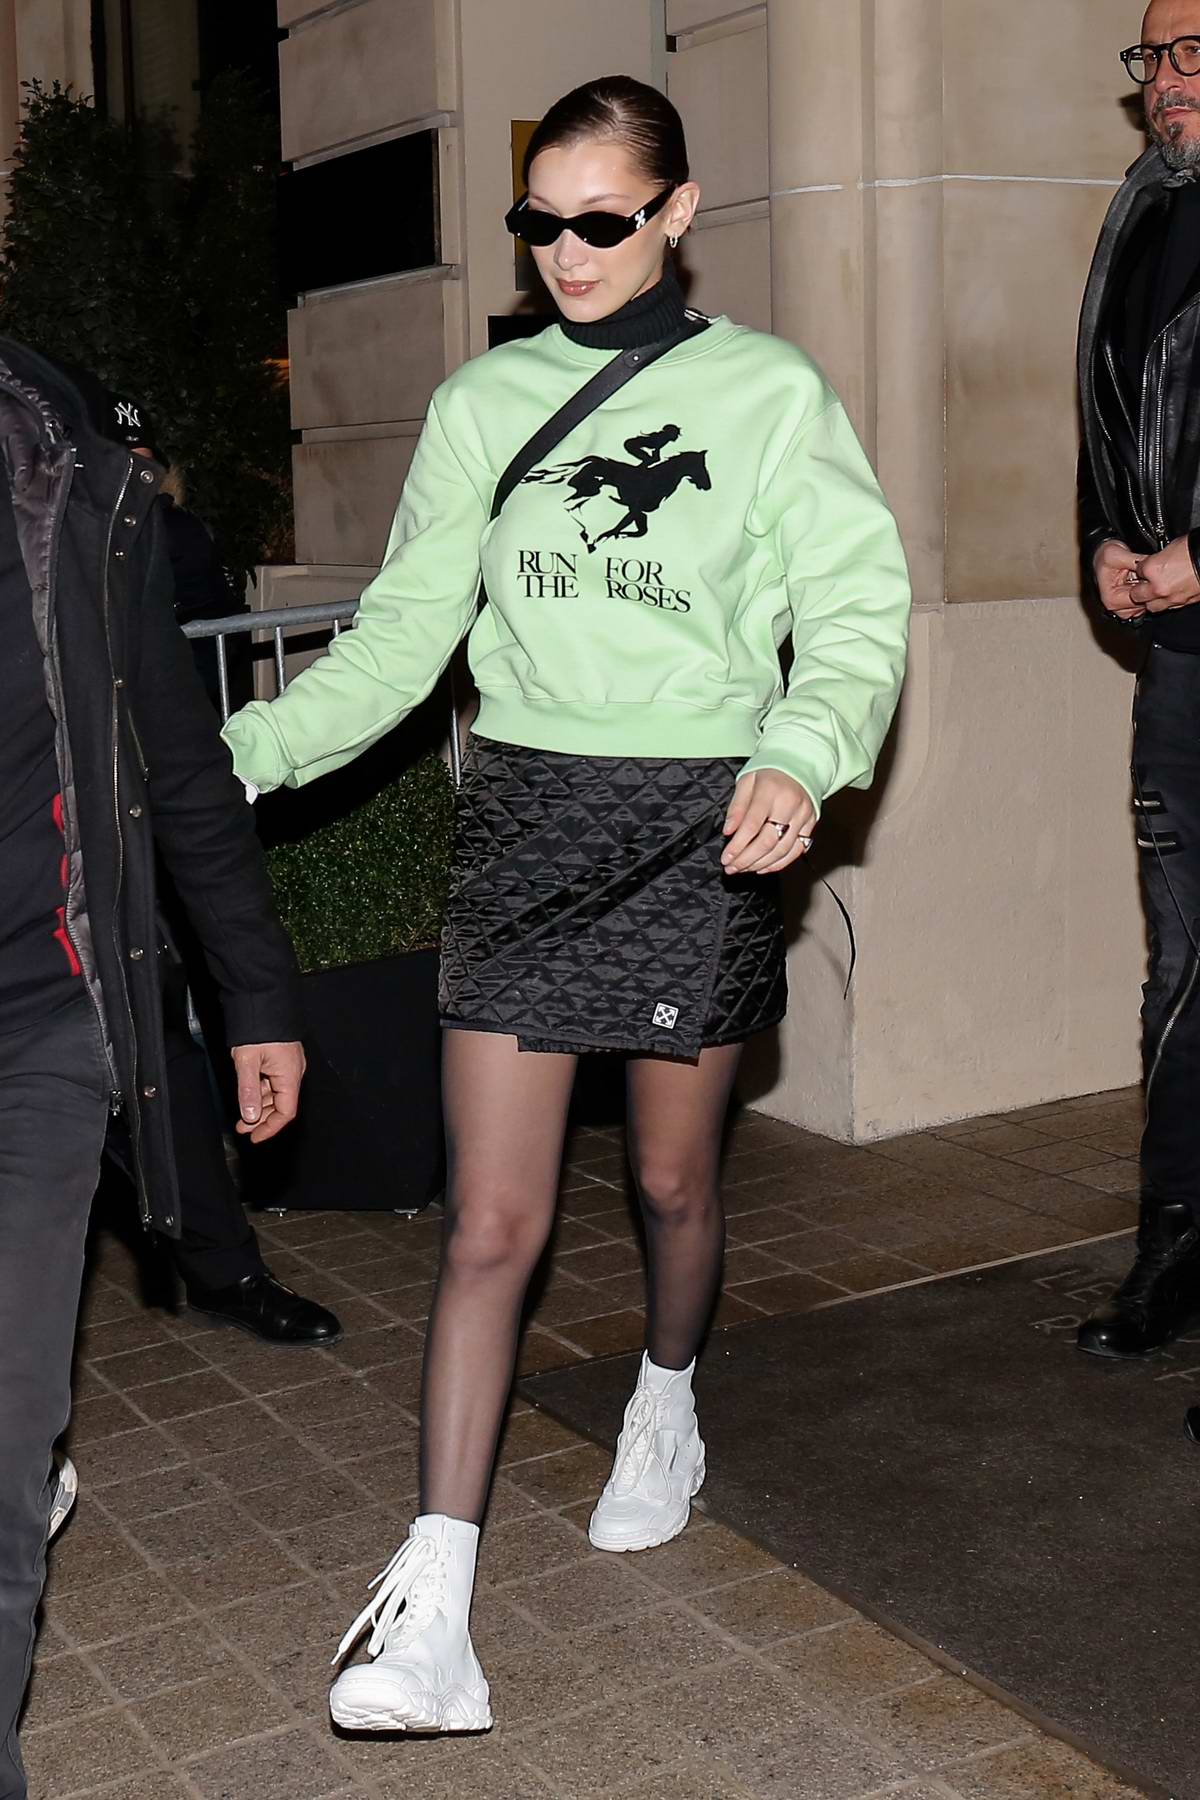 bella hadid steps out of her hotel wearing a green top, later she stops ...